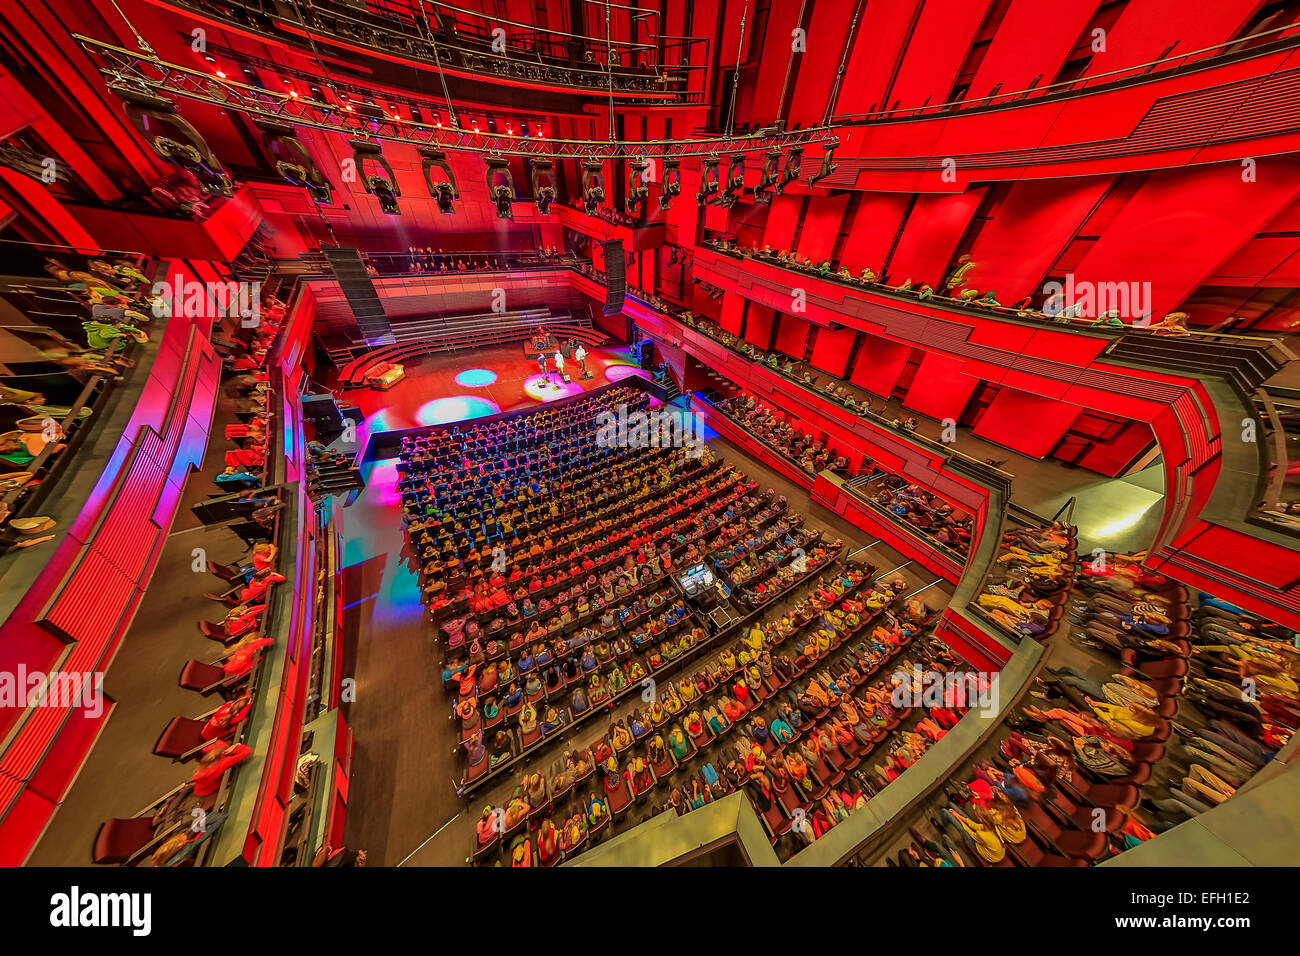 Interior of Theatre at Harpa, Annual Children's Festival, Reykjavik, Iceland Stock Photo